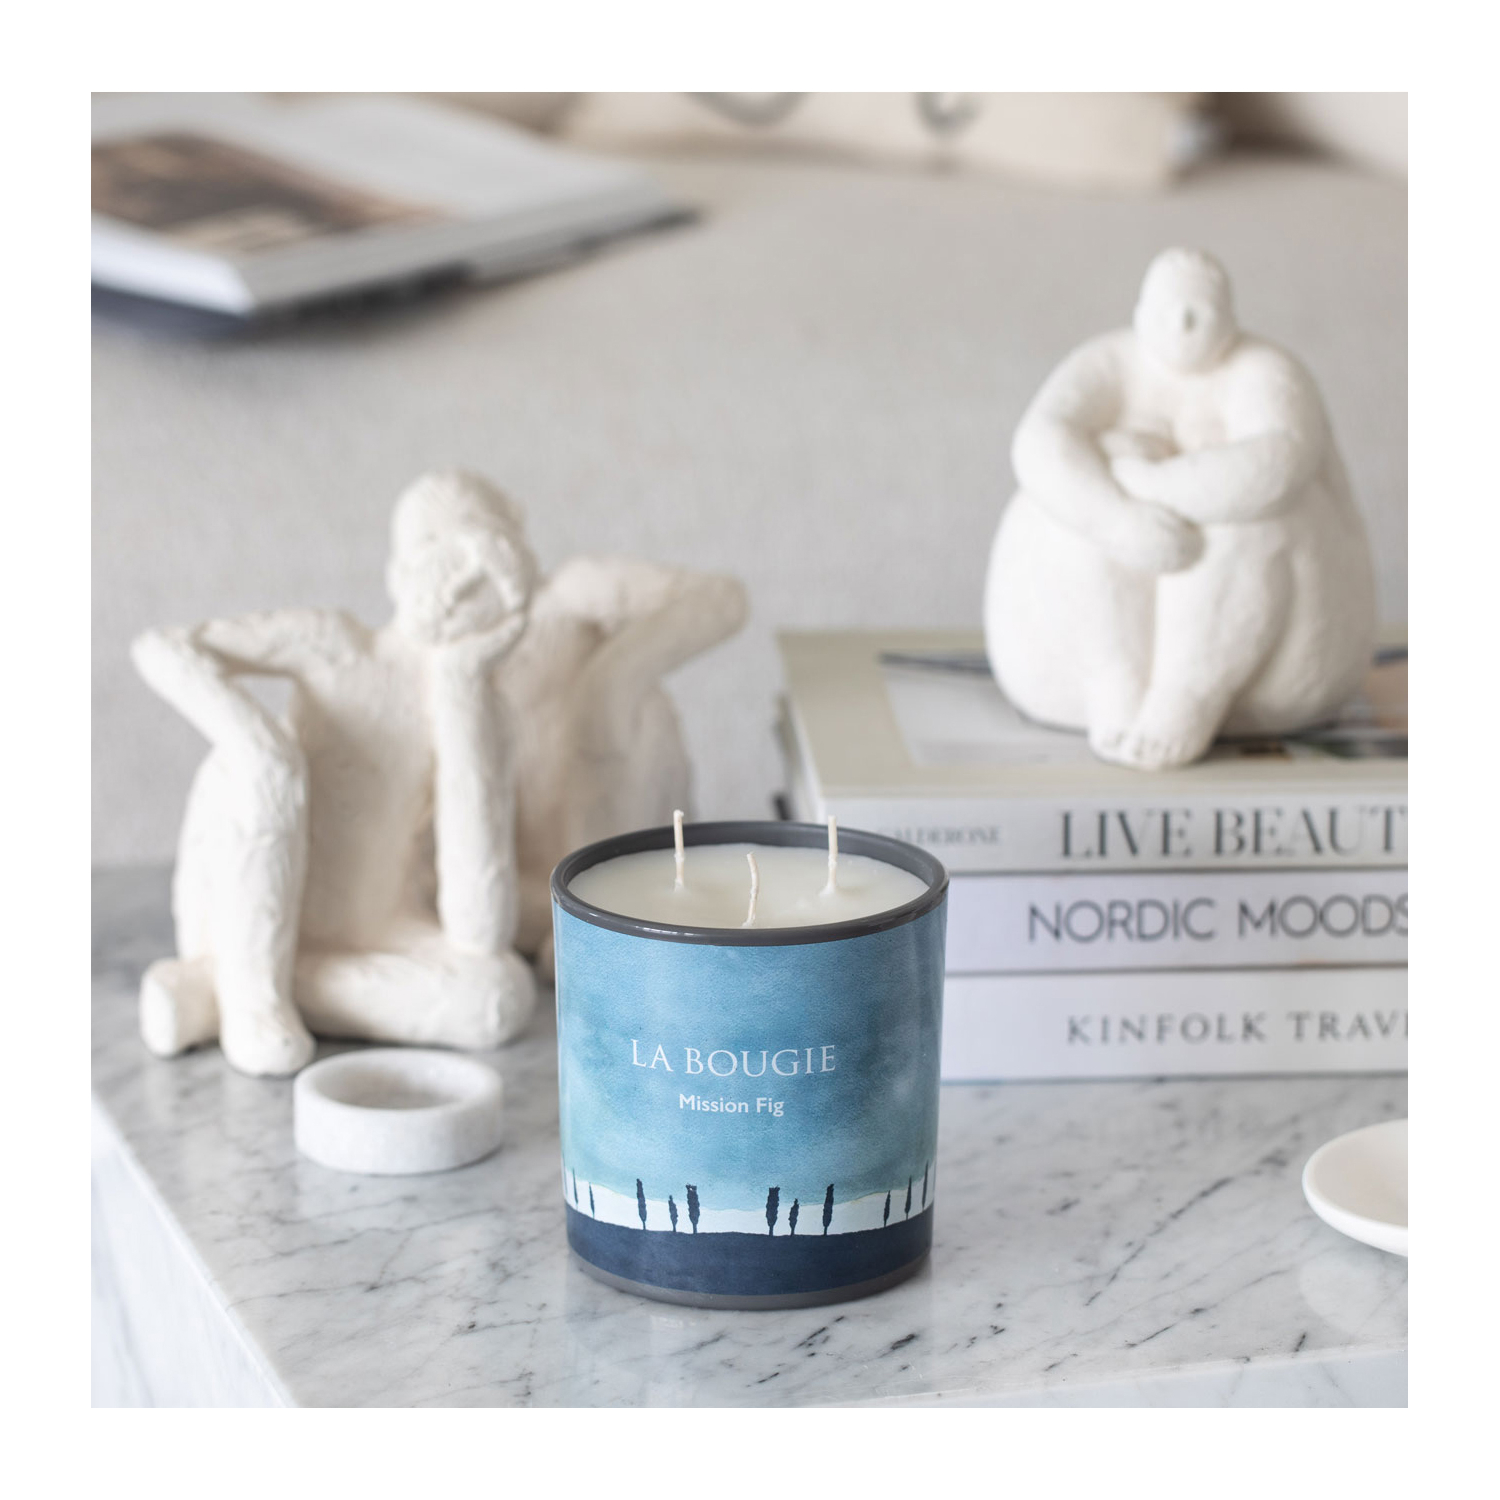 Limited Edition 3 Wick Mission Fig Candle